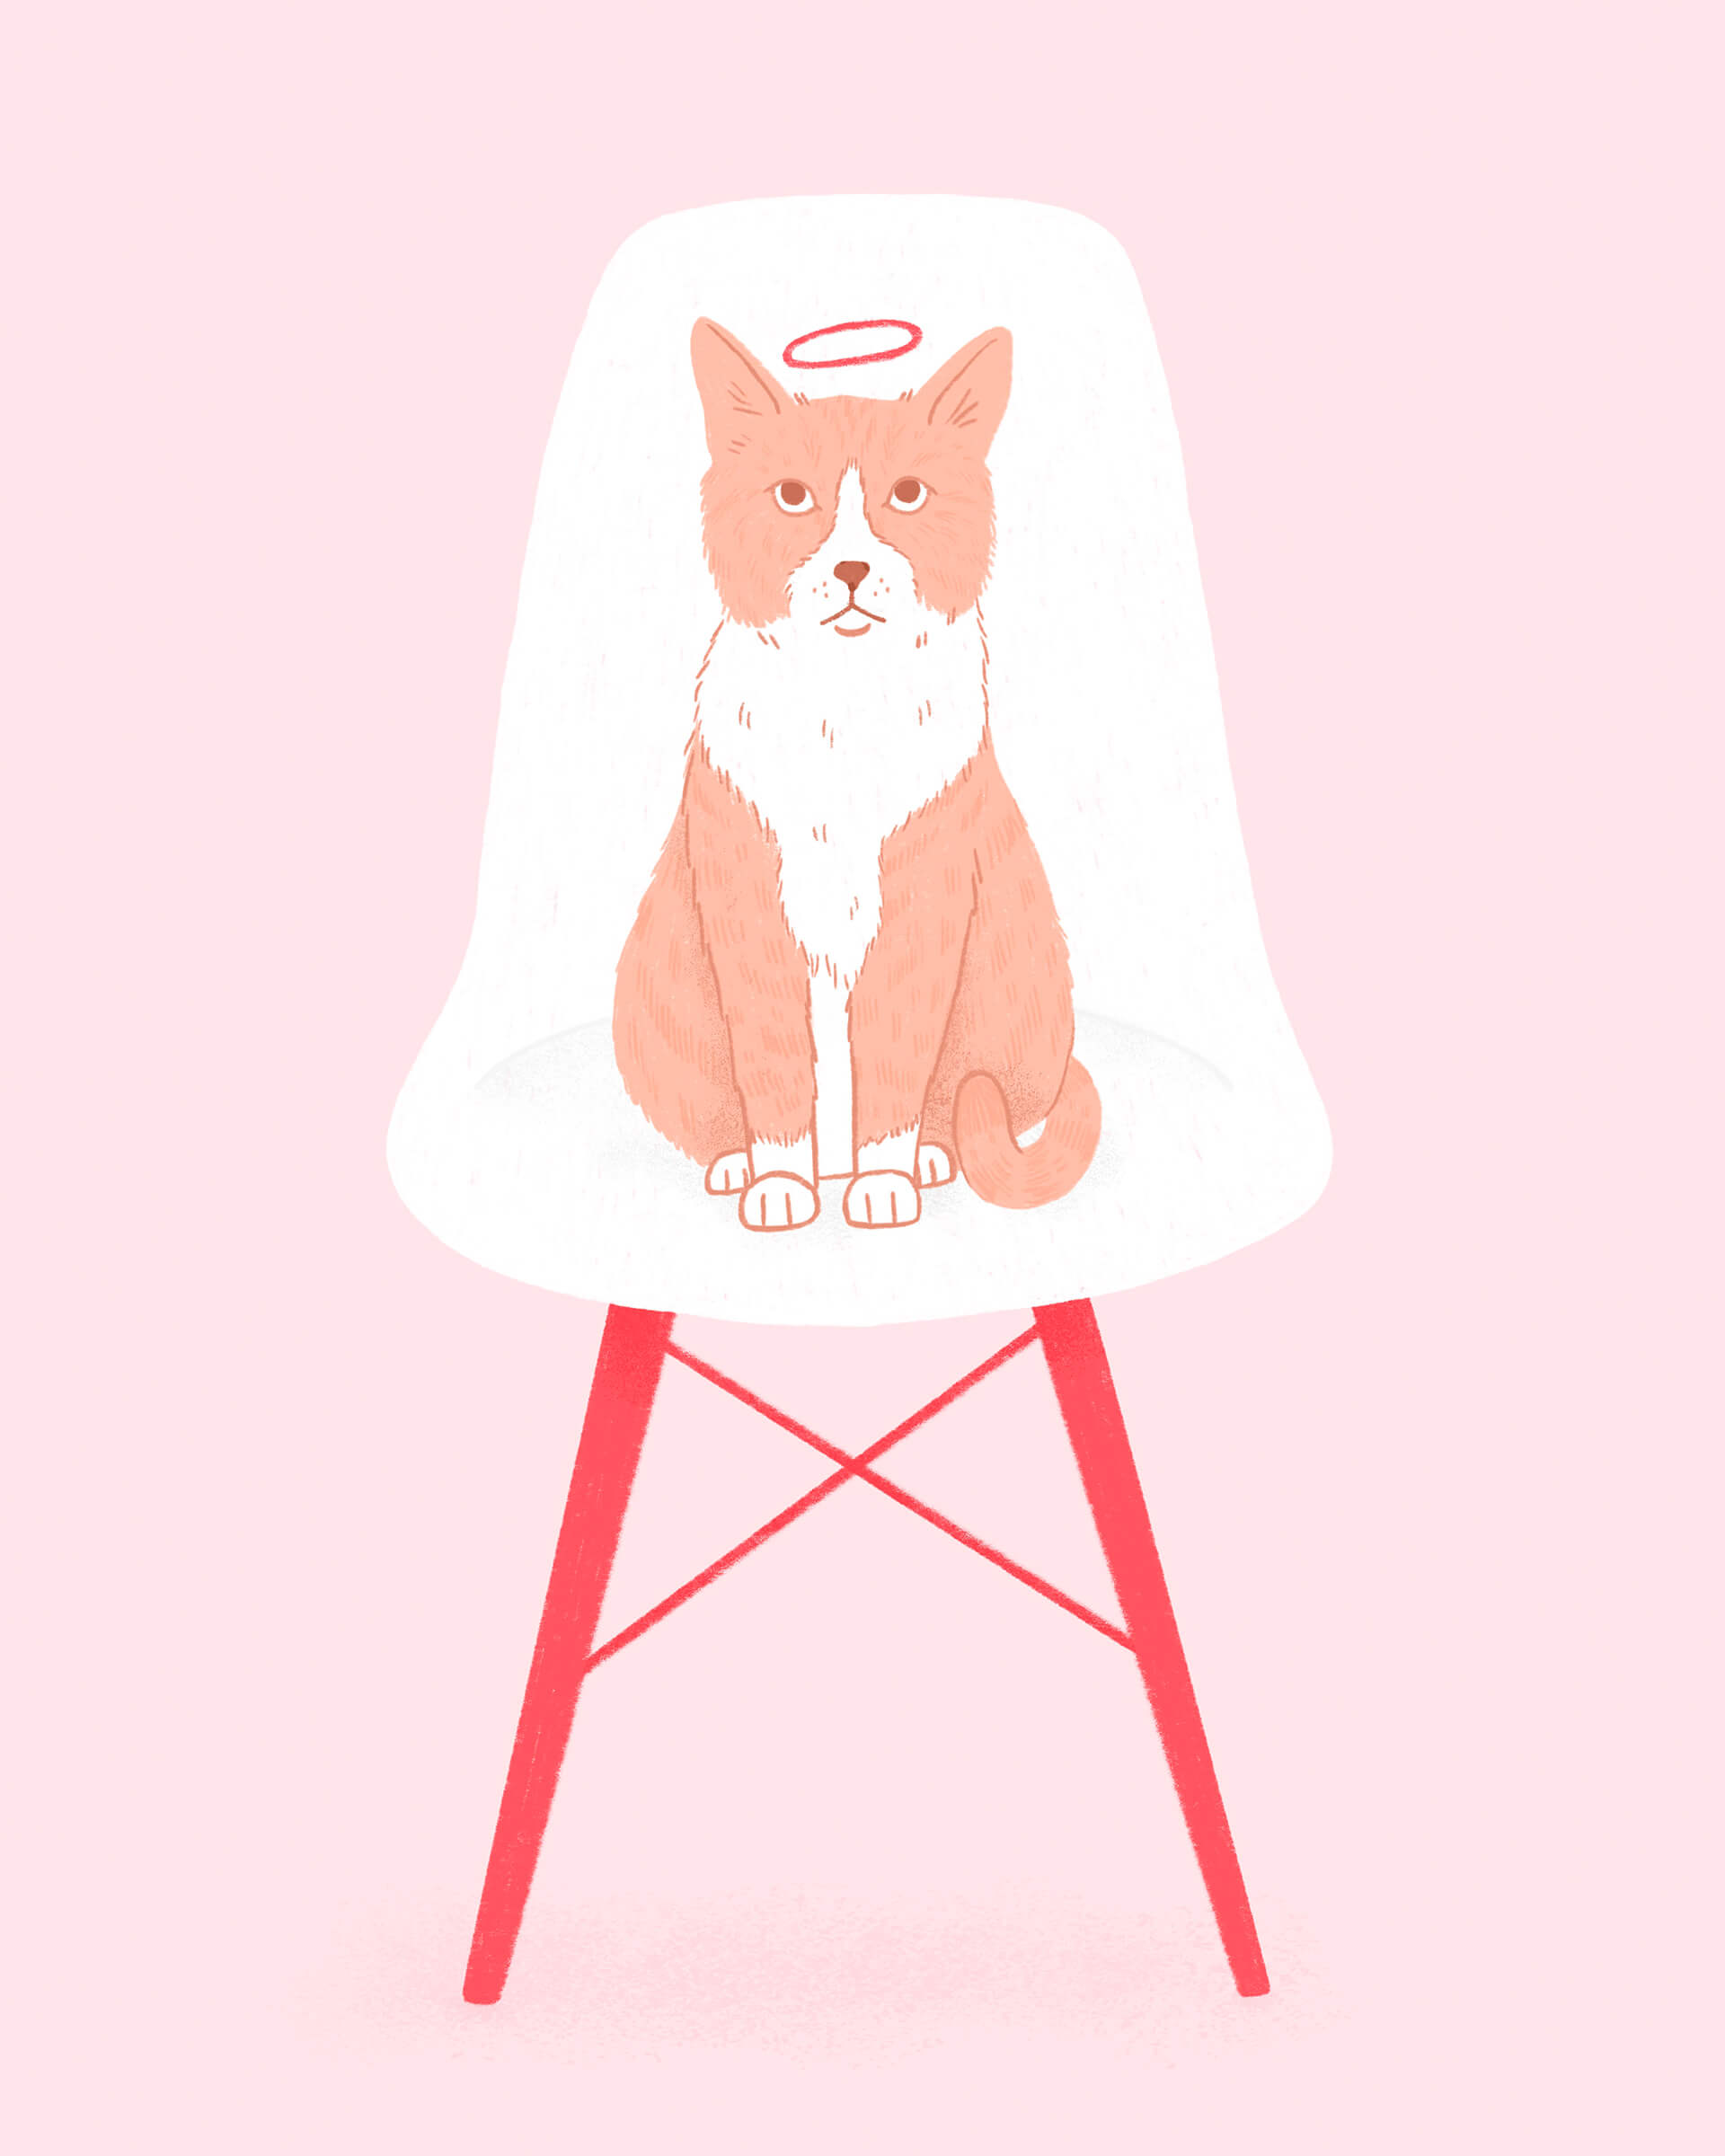 A serious looking cat sits on an eames chair with a halo above her head